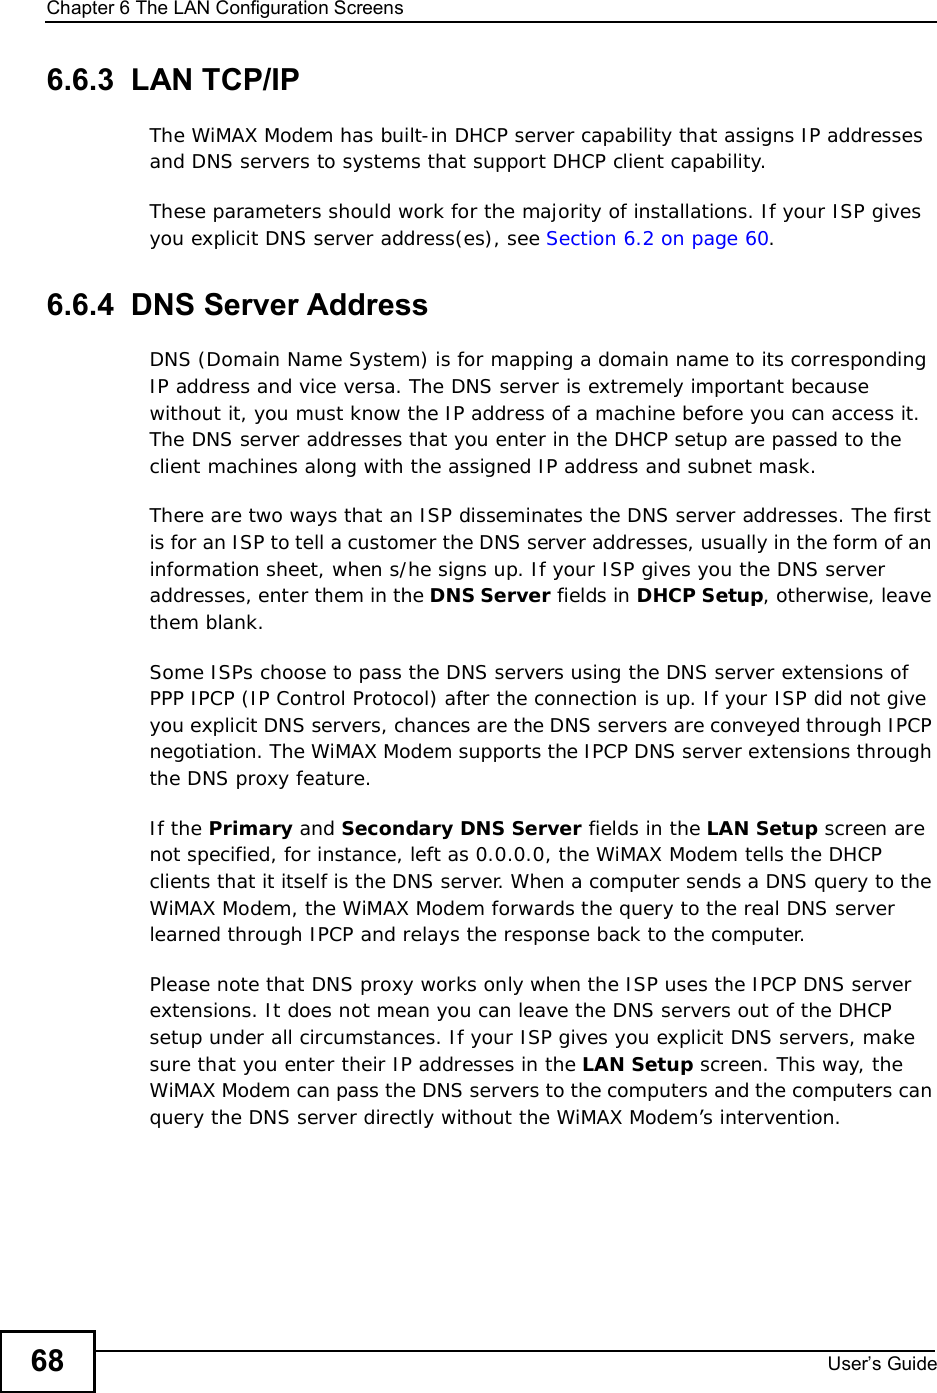 Chapter 6The LAN Configuration ScreensUser s Guide686.6.3  LAN TCP/IPThe WiMAX Modem has built-in DHCP server capability that assigns IP addresses and DNS servers to systems that support DHCP client capability.These parameters should work for the majority of installations. If your ISP gives you explicit DNS server address(es), see Section 6.2 on page 60.6.6.4  DNS Server AddressDNS (Domain Name System) is for mapping a domain name to its corresponding IP address and vice versa. The DNS server is extremely important because without it, you must know the IP address of a machine before you can access it. The DNS server addresses that you enter in the DHCP setup are passed to the client machines along with the assigned IP address and subnet mask.There are two ways that an ISP disseminates the DNS server addresses. The first is for an ISP to tell a customer the DNS server addresses, usually in the form of an information sheet, when s/he signs up. If your ISP gives you the DNS server addresses, enter them in the DNS Server fields in DHCP Setup, otherwise, leave them blank.Some ISPs choose to pass the DNS servers using the DNS server extensions of PPP IPCP (IP Control Protocol) after the connection is up. If your ISP did not give you explicit DNS servers, chances are the DNS servers are conveyed through IPCP negotiation. The WiMAX Modem supports the IPCP DNS server extensions through the DNS proxy feature.If the Primary and Secondary DNS Server fields in the LAN Setup screen are notspecified, for instance, left as 0.0.0.0, the WiMAX Modem tells the DHCP clients that it itself is the DNS server. When a computer sends a DNS query to the WiMAX Modem, the WiMAX Modem forwards the query to the real DNS server learned through IPCP and relays the response back to the computer.Please note that DNS proxy works only when the ISP uses the IPCP DNS server extensions. It does not mean you can leave the DNS servers out of the DHCP setup under all circumstances. If your ISP gives you explicit DNS servers, make sure that you enter their IP addresses in the LAN Setup screen. This way, the WiMAX Modem can pass the DNS servers to the computers and the computers can query the DNS server directly without the WiMAX Modem’s intervention.